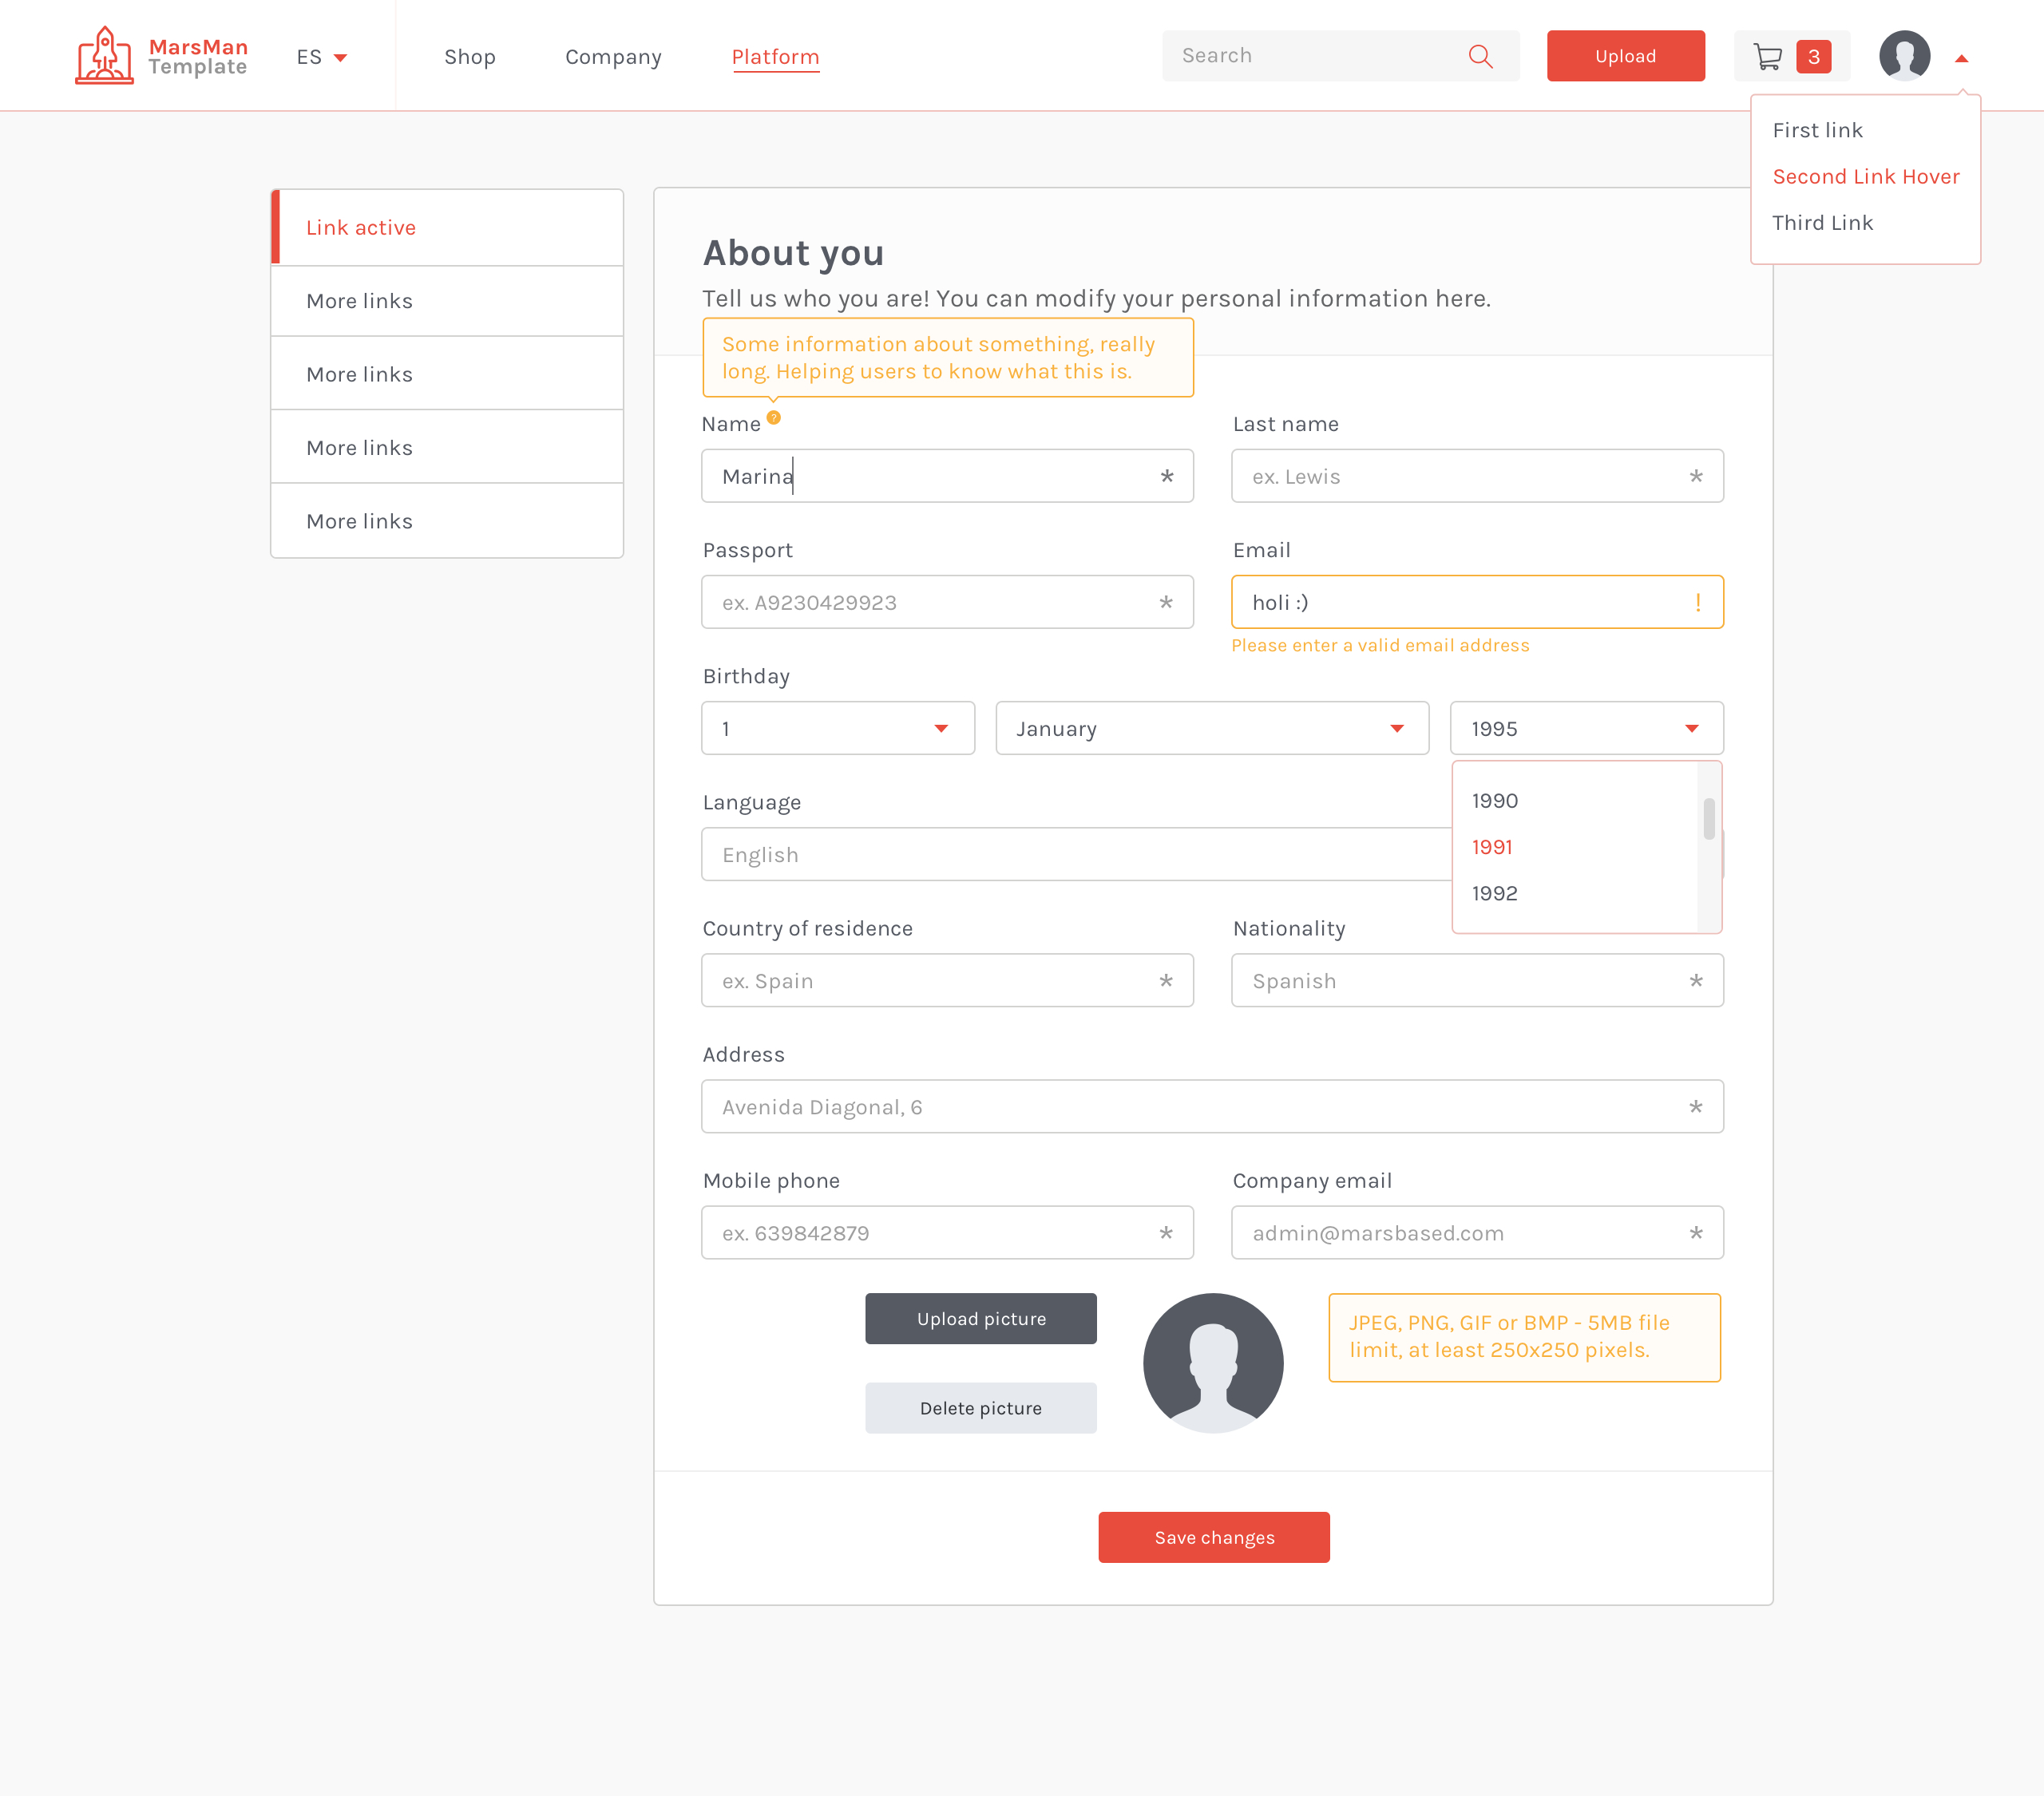 Edit Profile page in the MarsMan Template